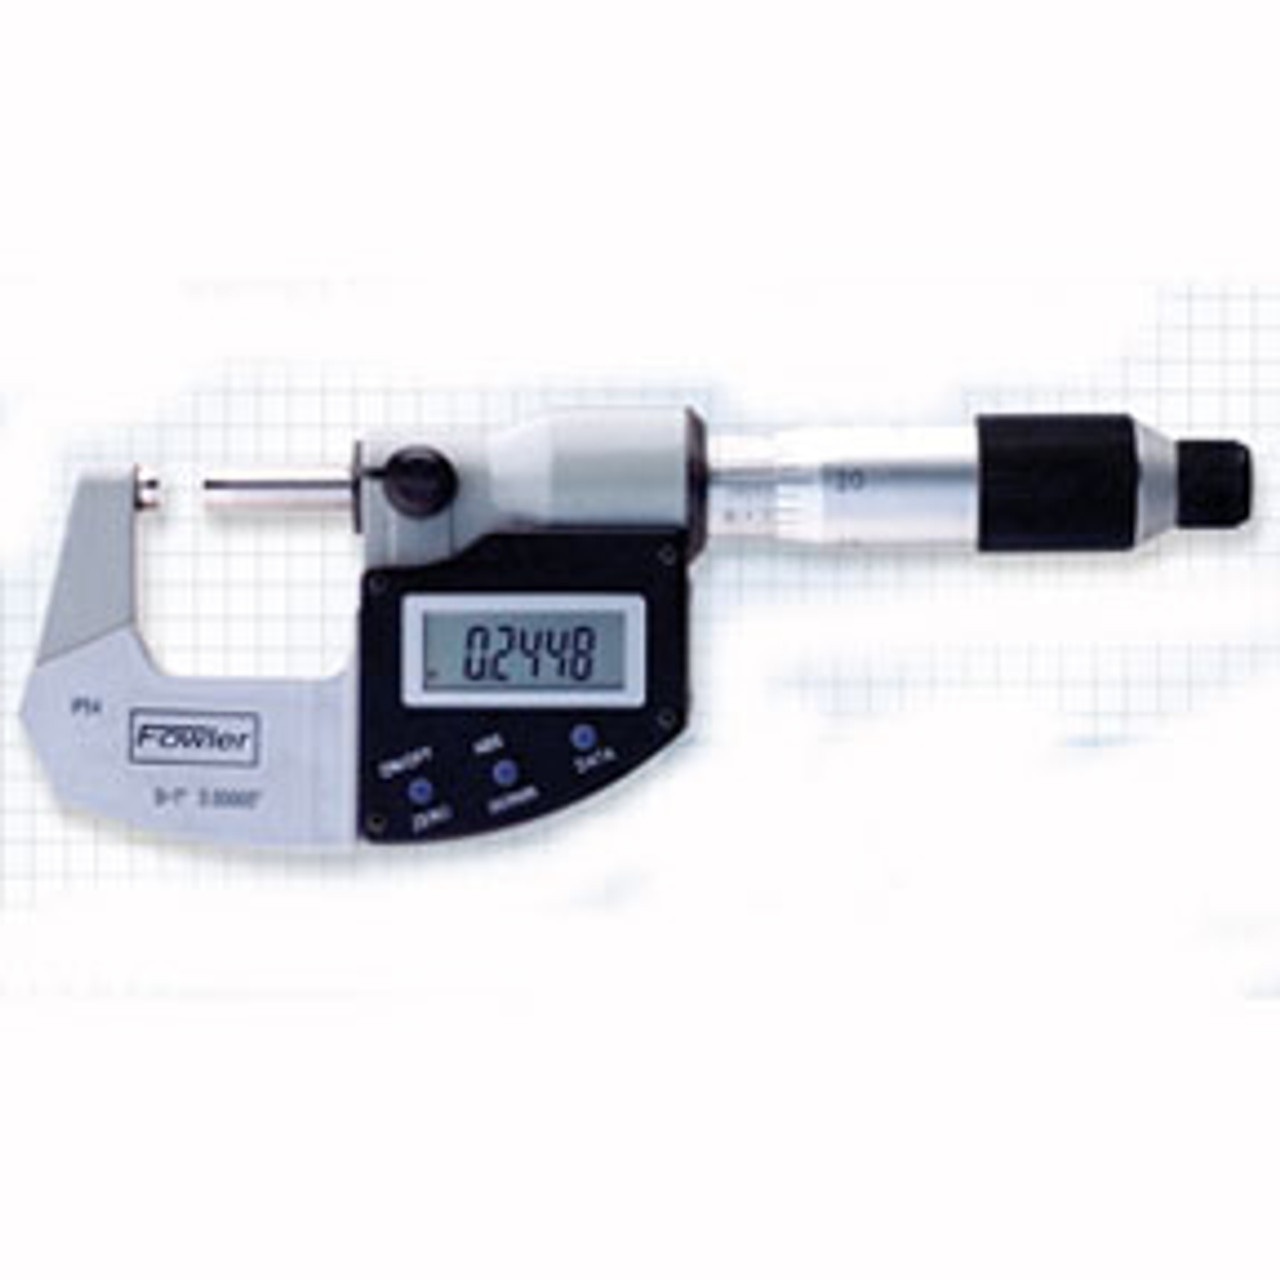 0-1"/25mm Electronic Outside Micrometer  FOW-74-815-001-2